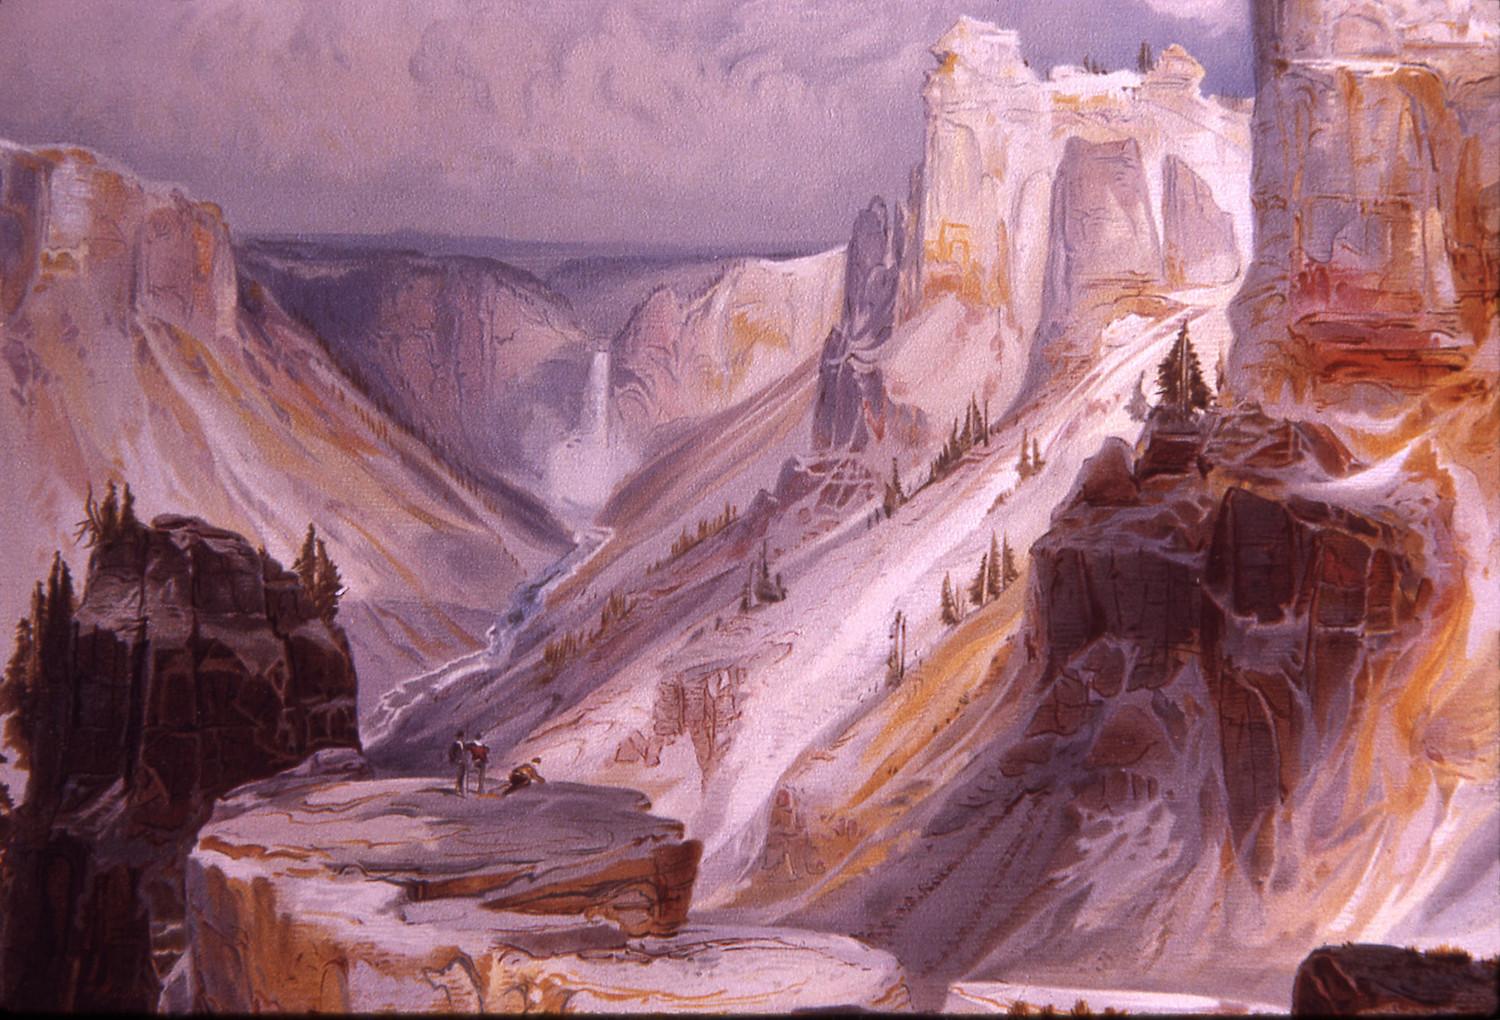 Thomas Moran accompanied a scientific expedition to the Yellowstone region in 1871 and put imagery to the "wild stories" of the place/NPS